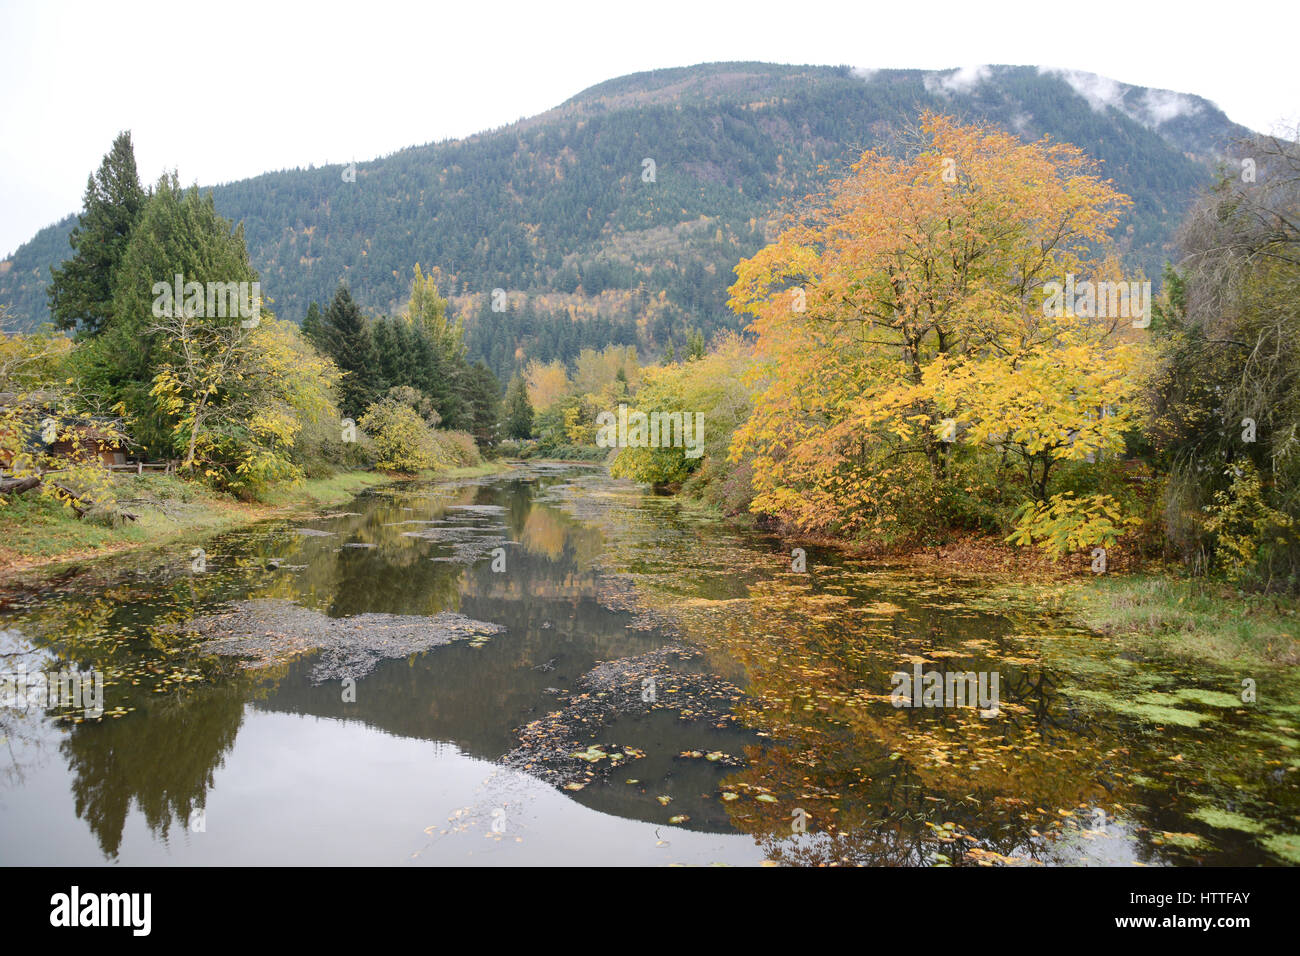 An autumn view of the Miami River near its mouth at Harrison Lake, in the town of Harrison Hot Springs, British Columbia, Canada. Stock Photo